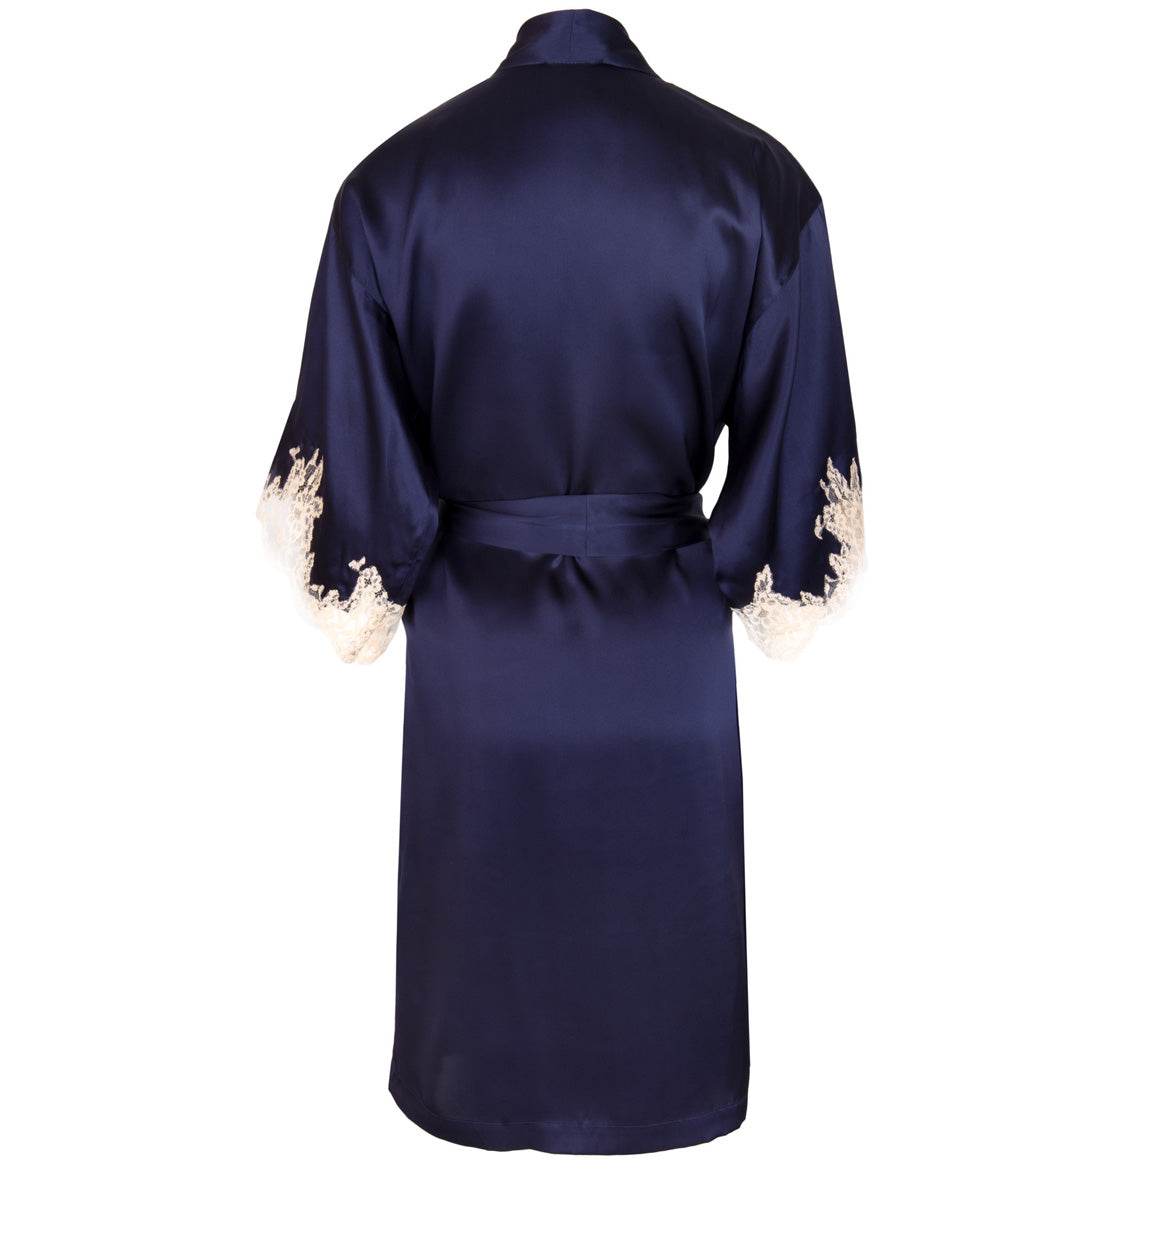 Navy blue luxury silk & embroidered robe by Lise Charmel at Di Moda Lingerie Toronto